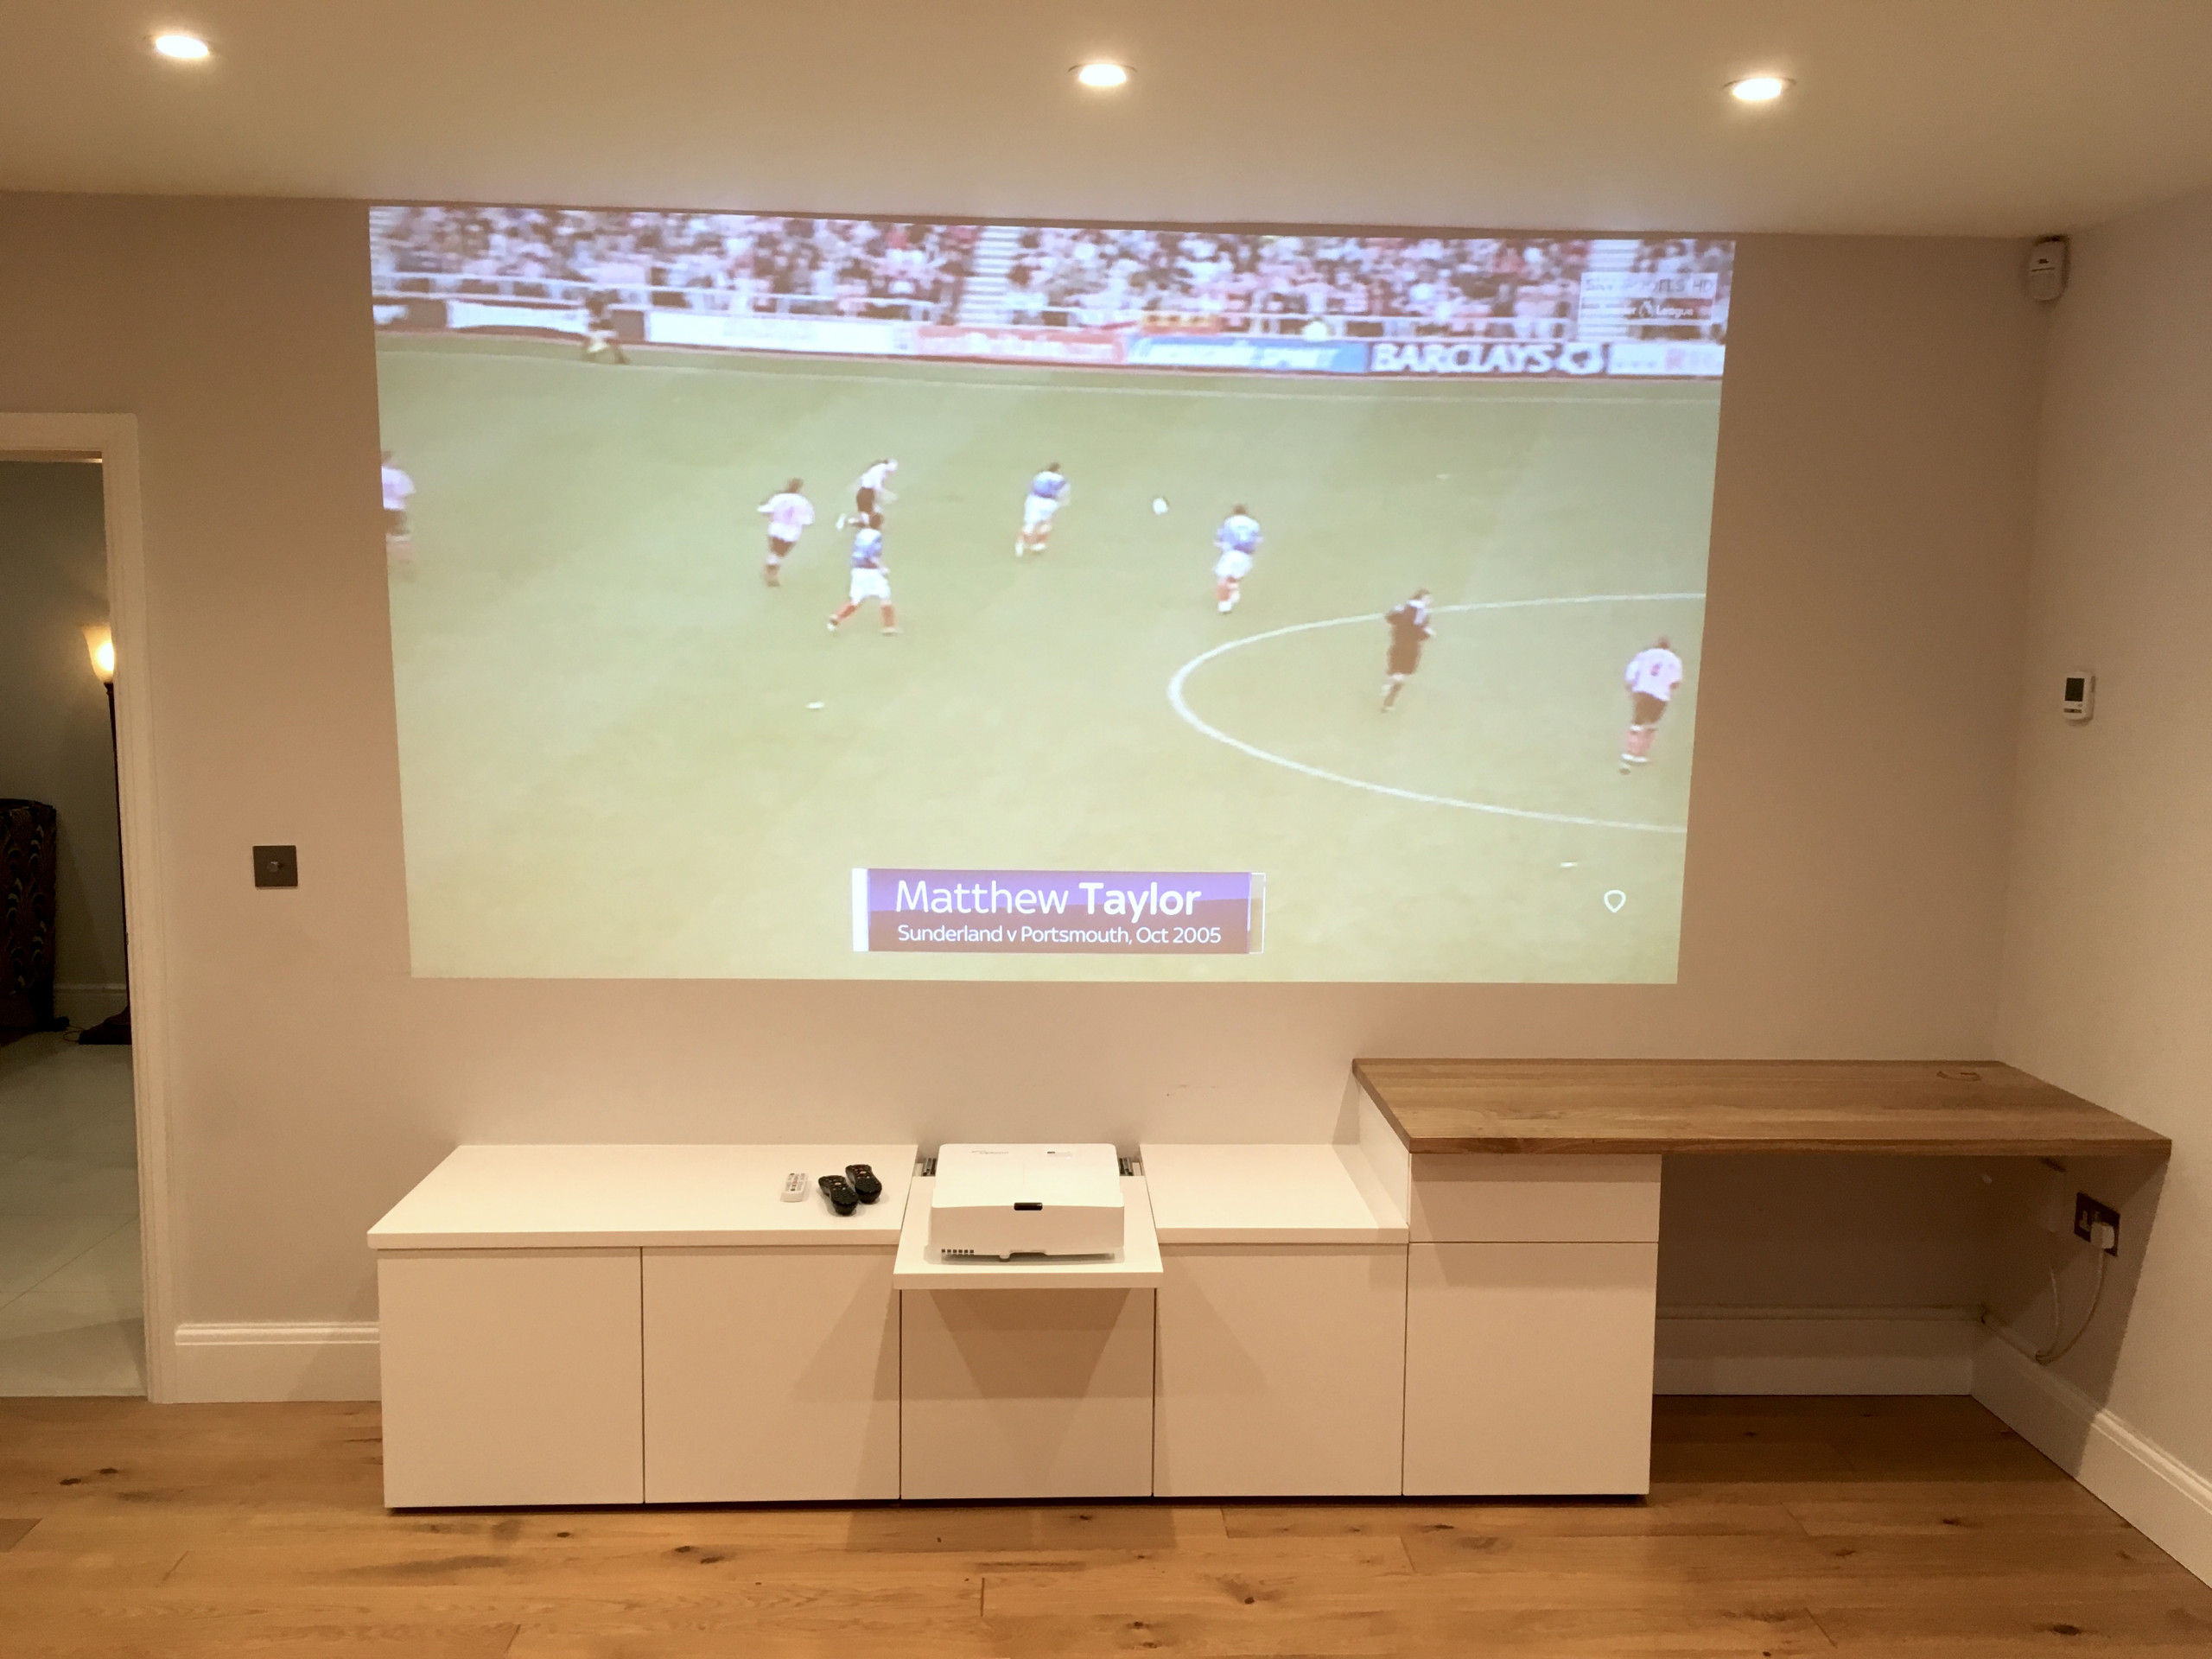 Minimalist Storage Unit with Projector and Desk